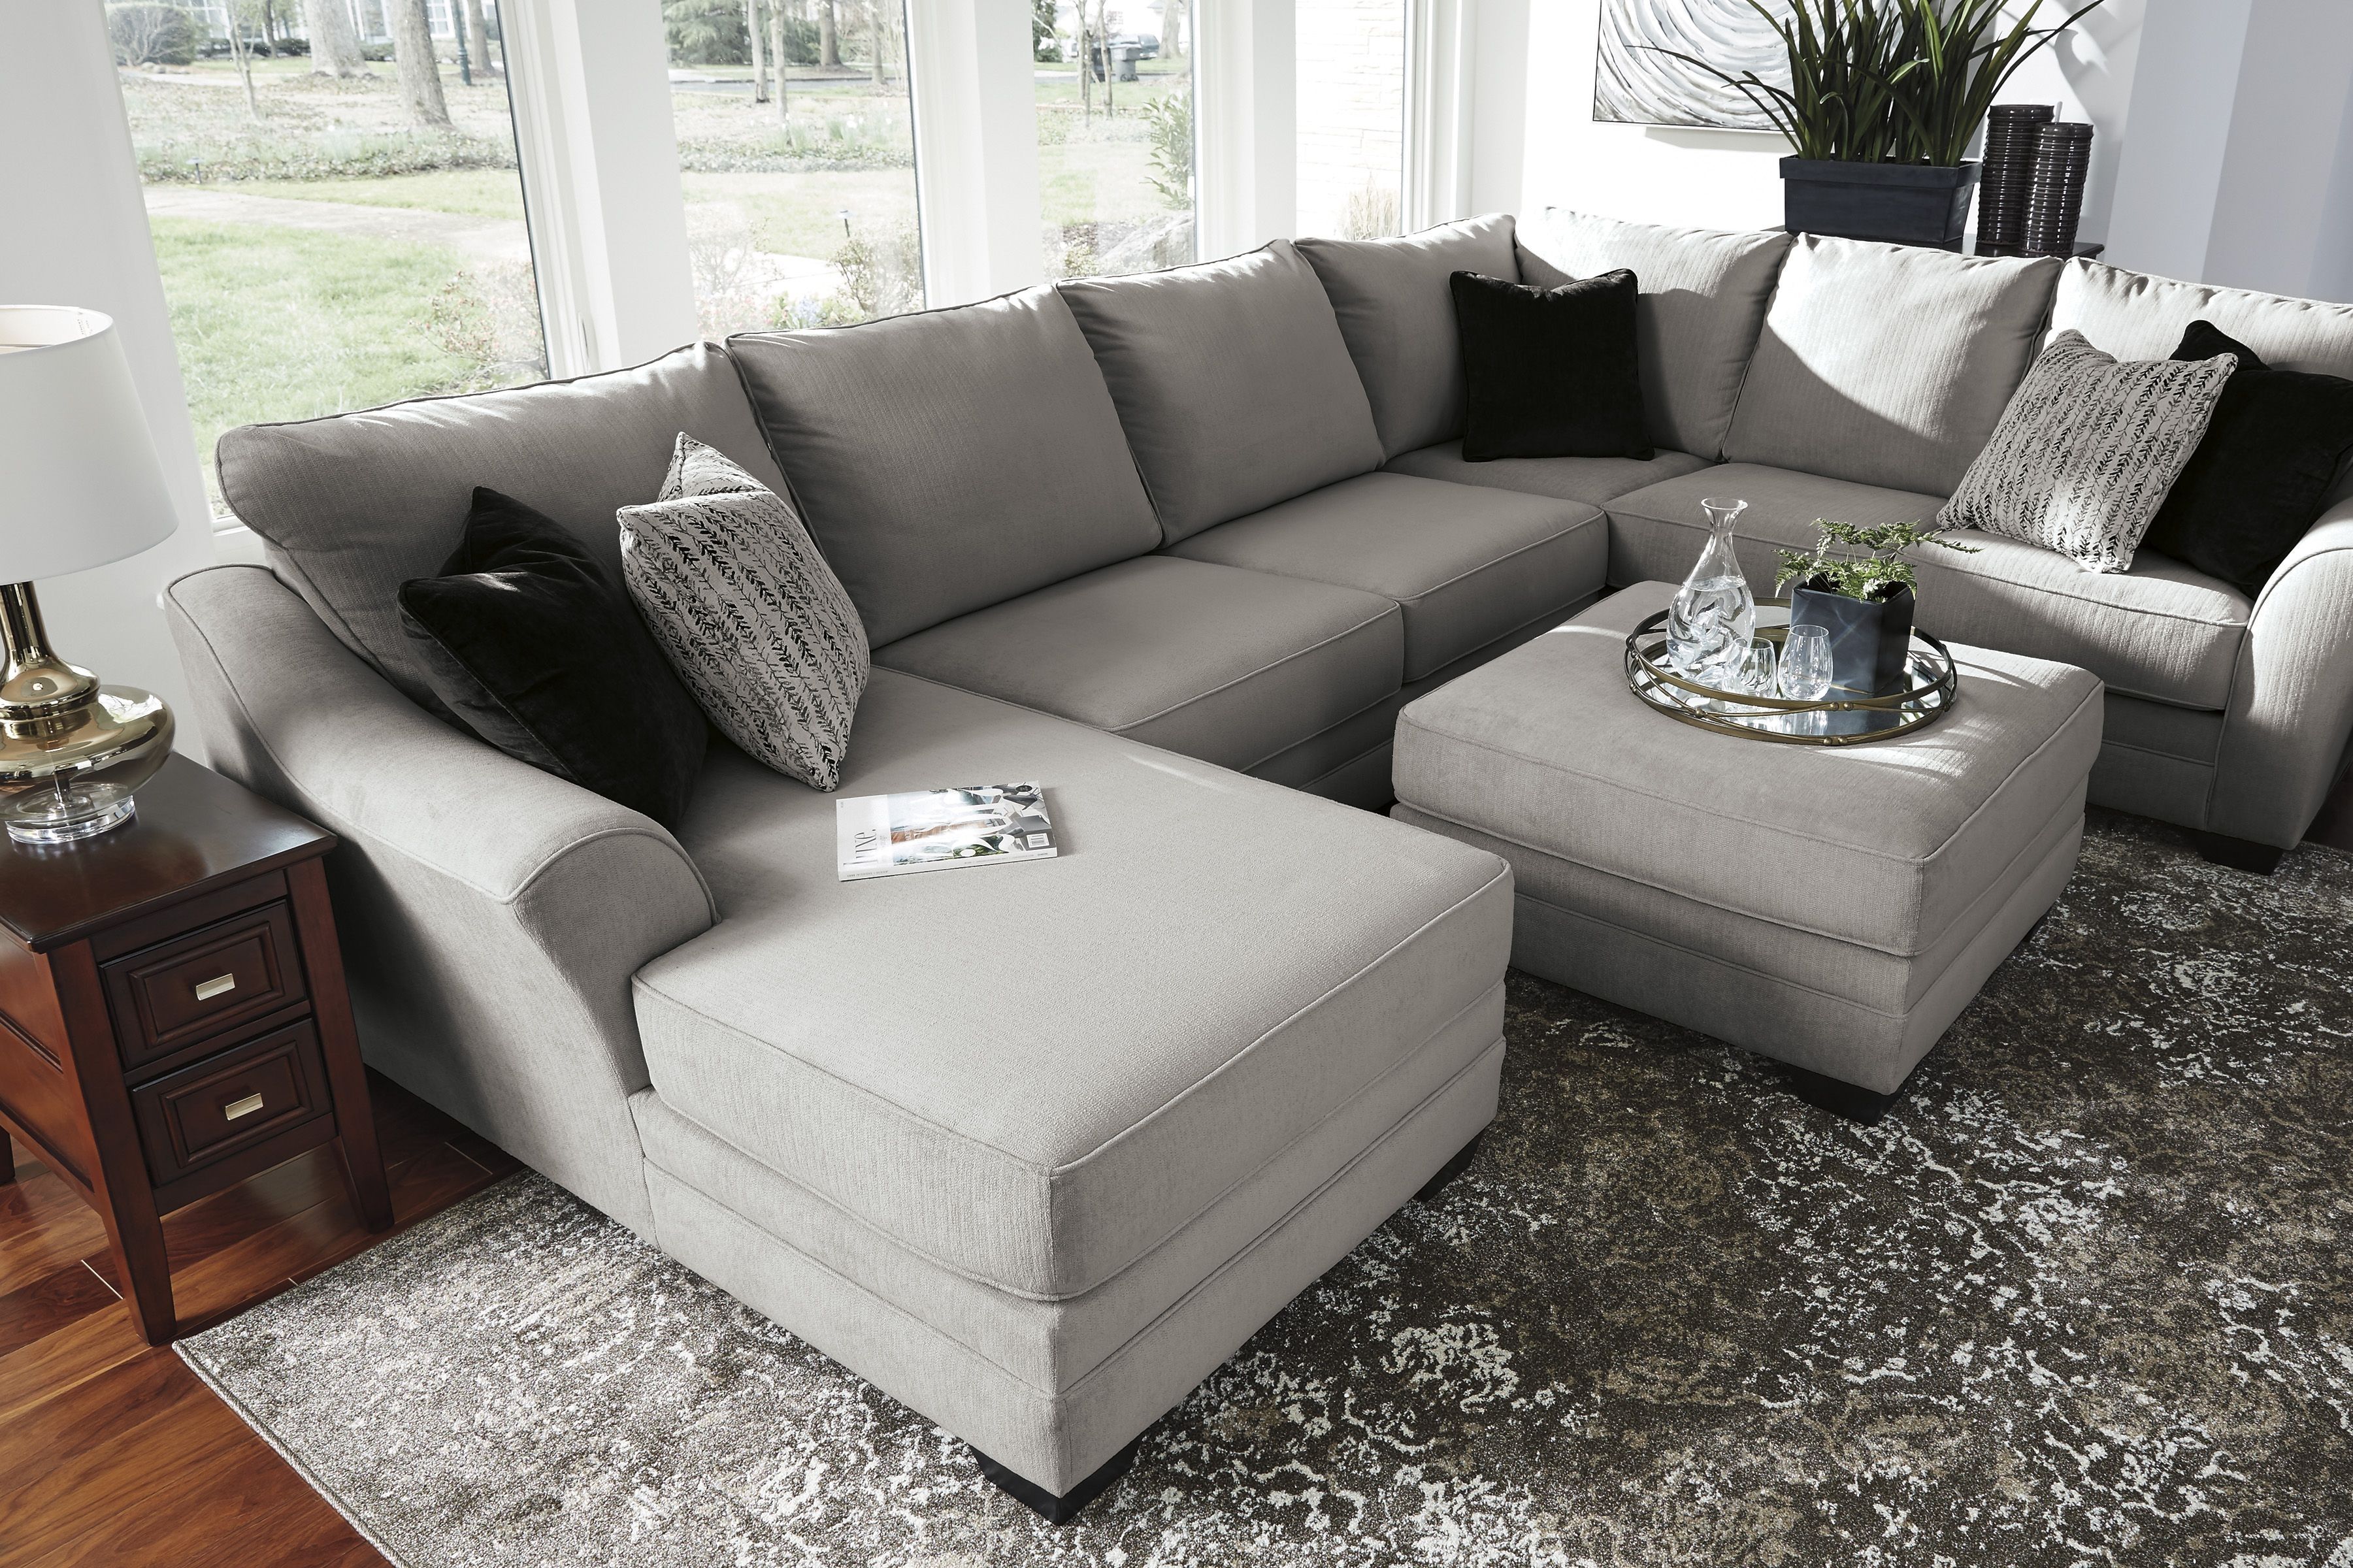 Palempor 3 Piece Laf Sectional In 2018 | Home Is Where The Heart Is Regarding Norfolk Grey 3 Piece Sectionals With Raf Chaise (View 9 of 30)